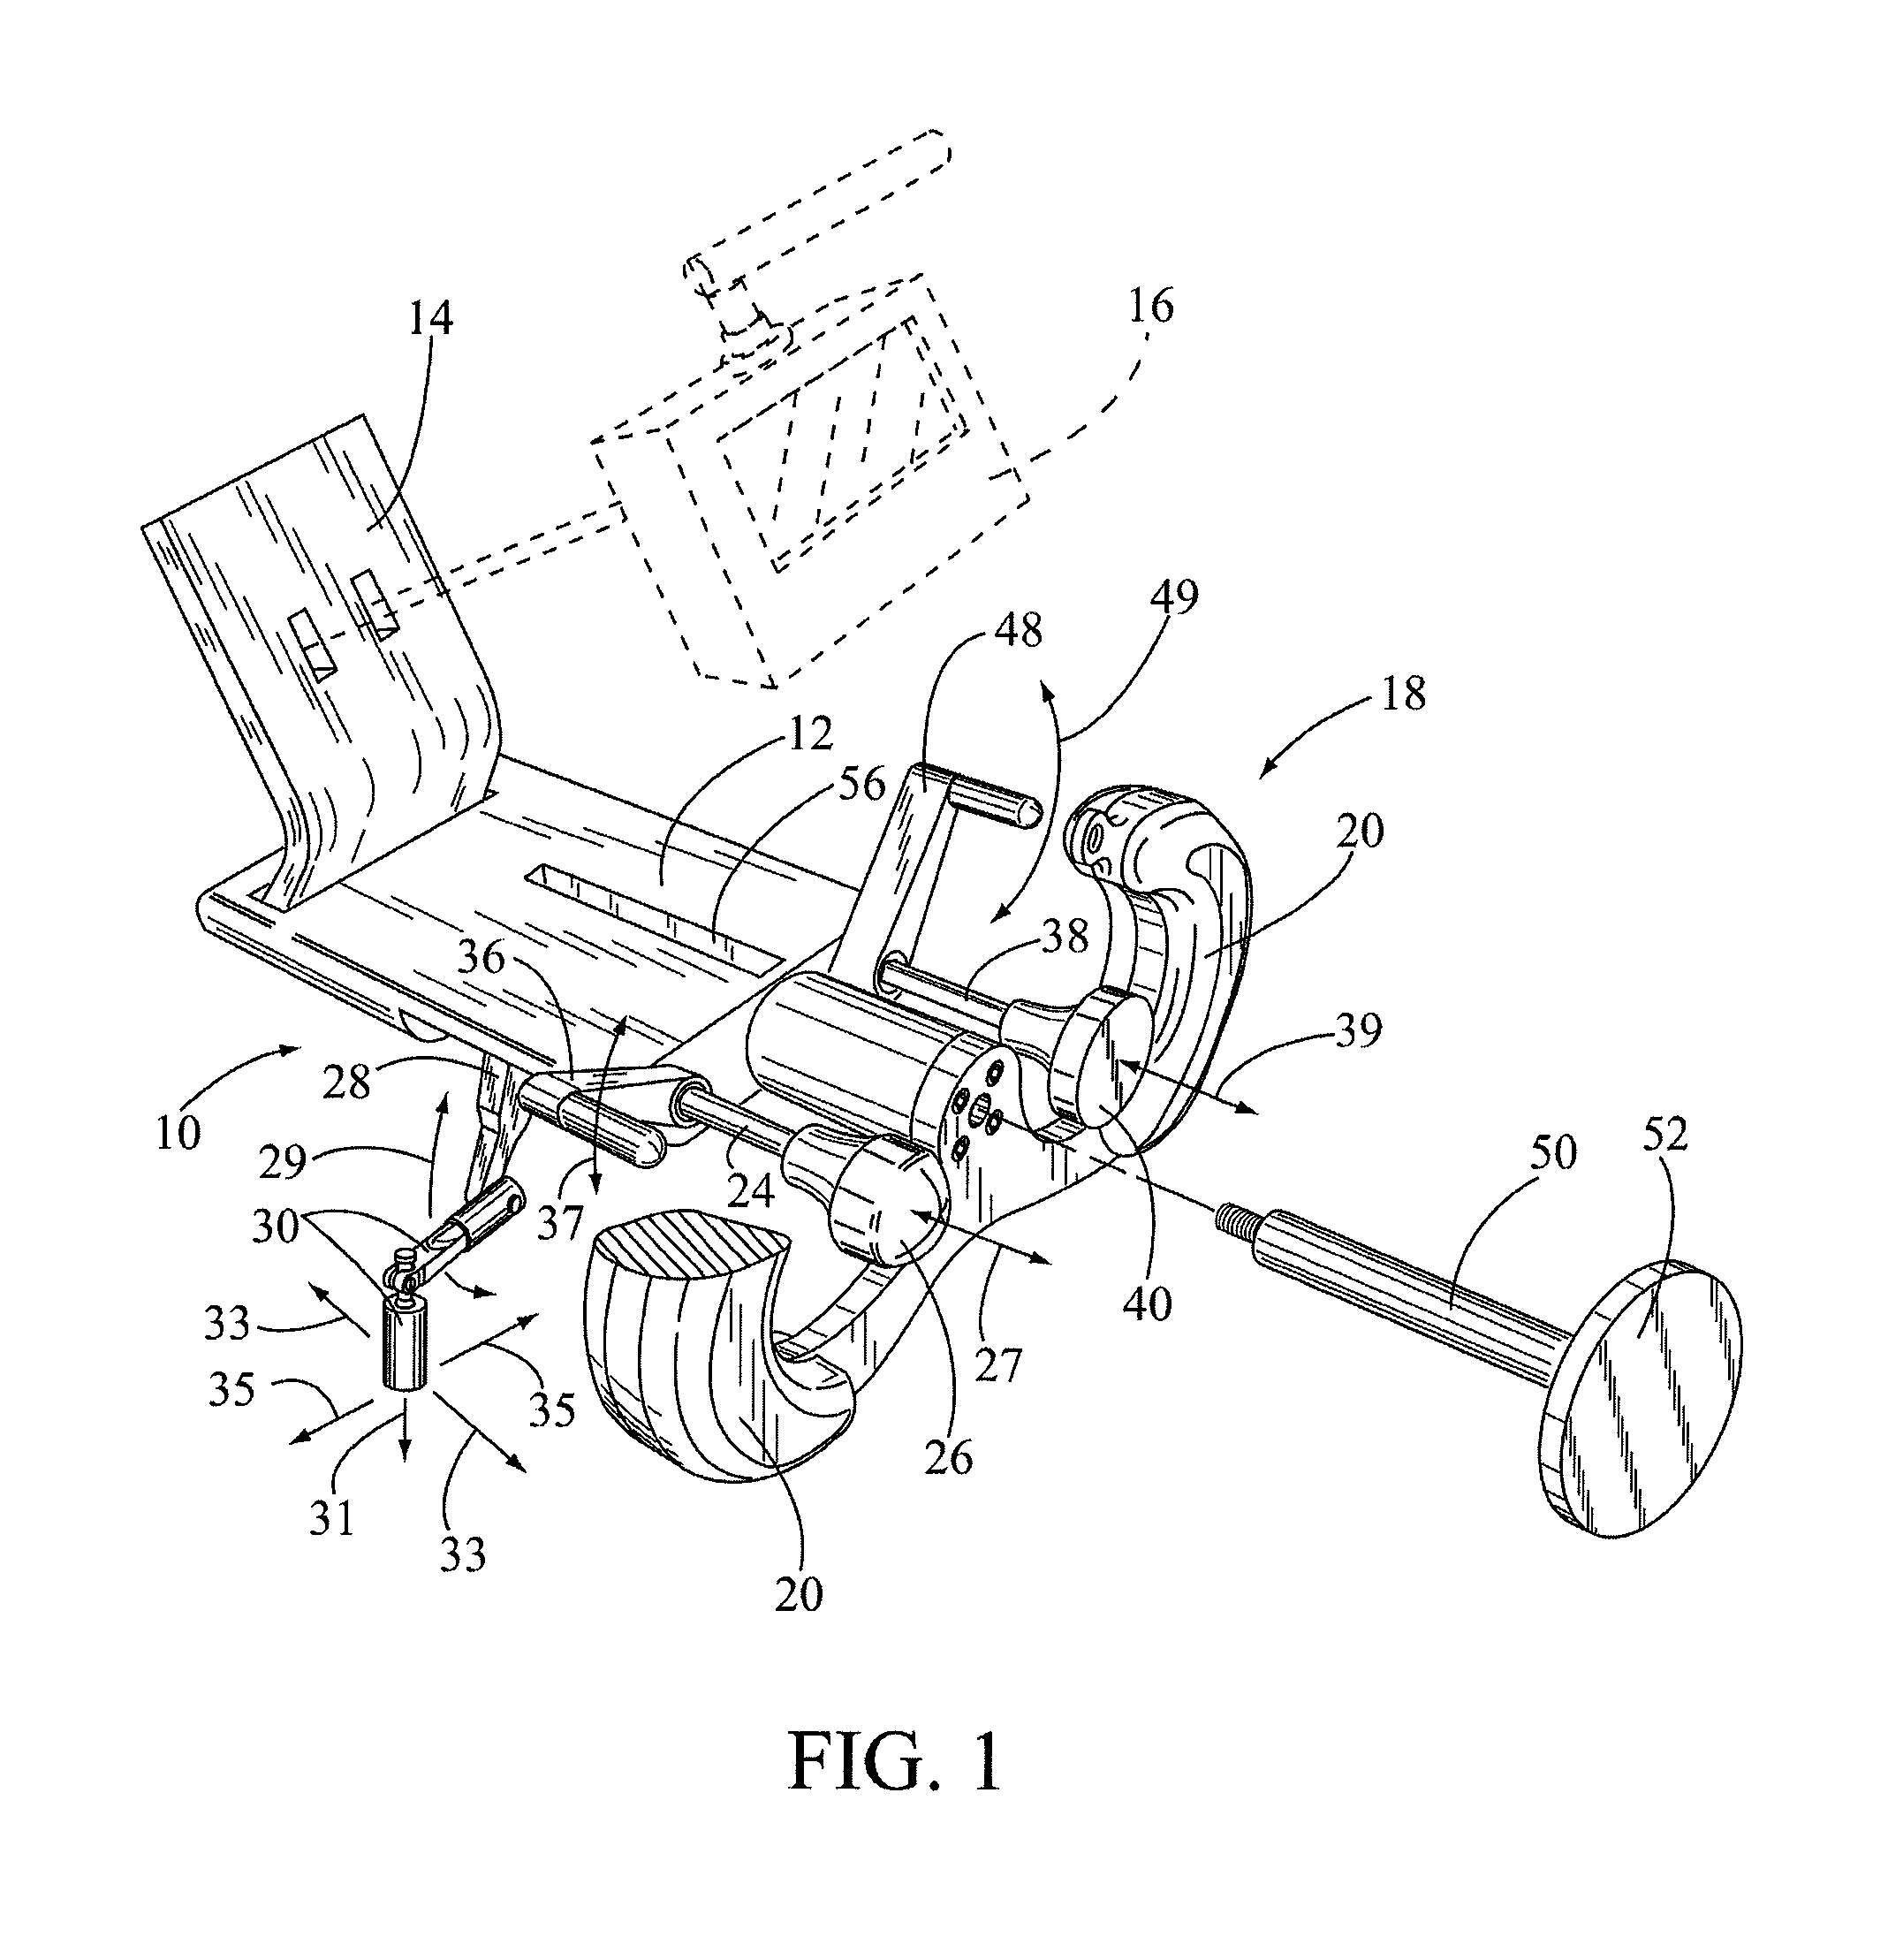 Portable cockpit yoke assembly for mounting on a radio controlled transmitter used with a model airplane